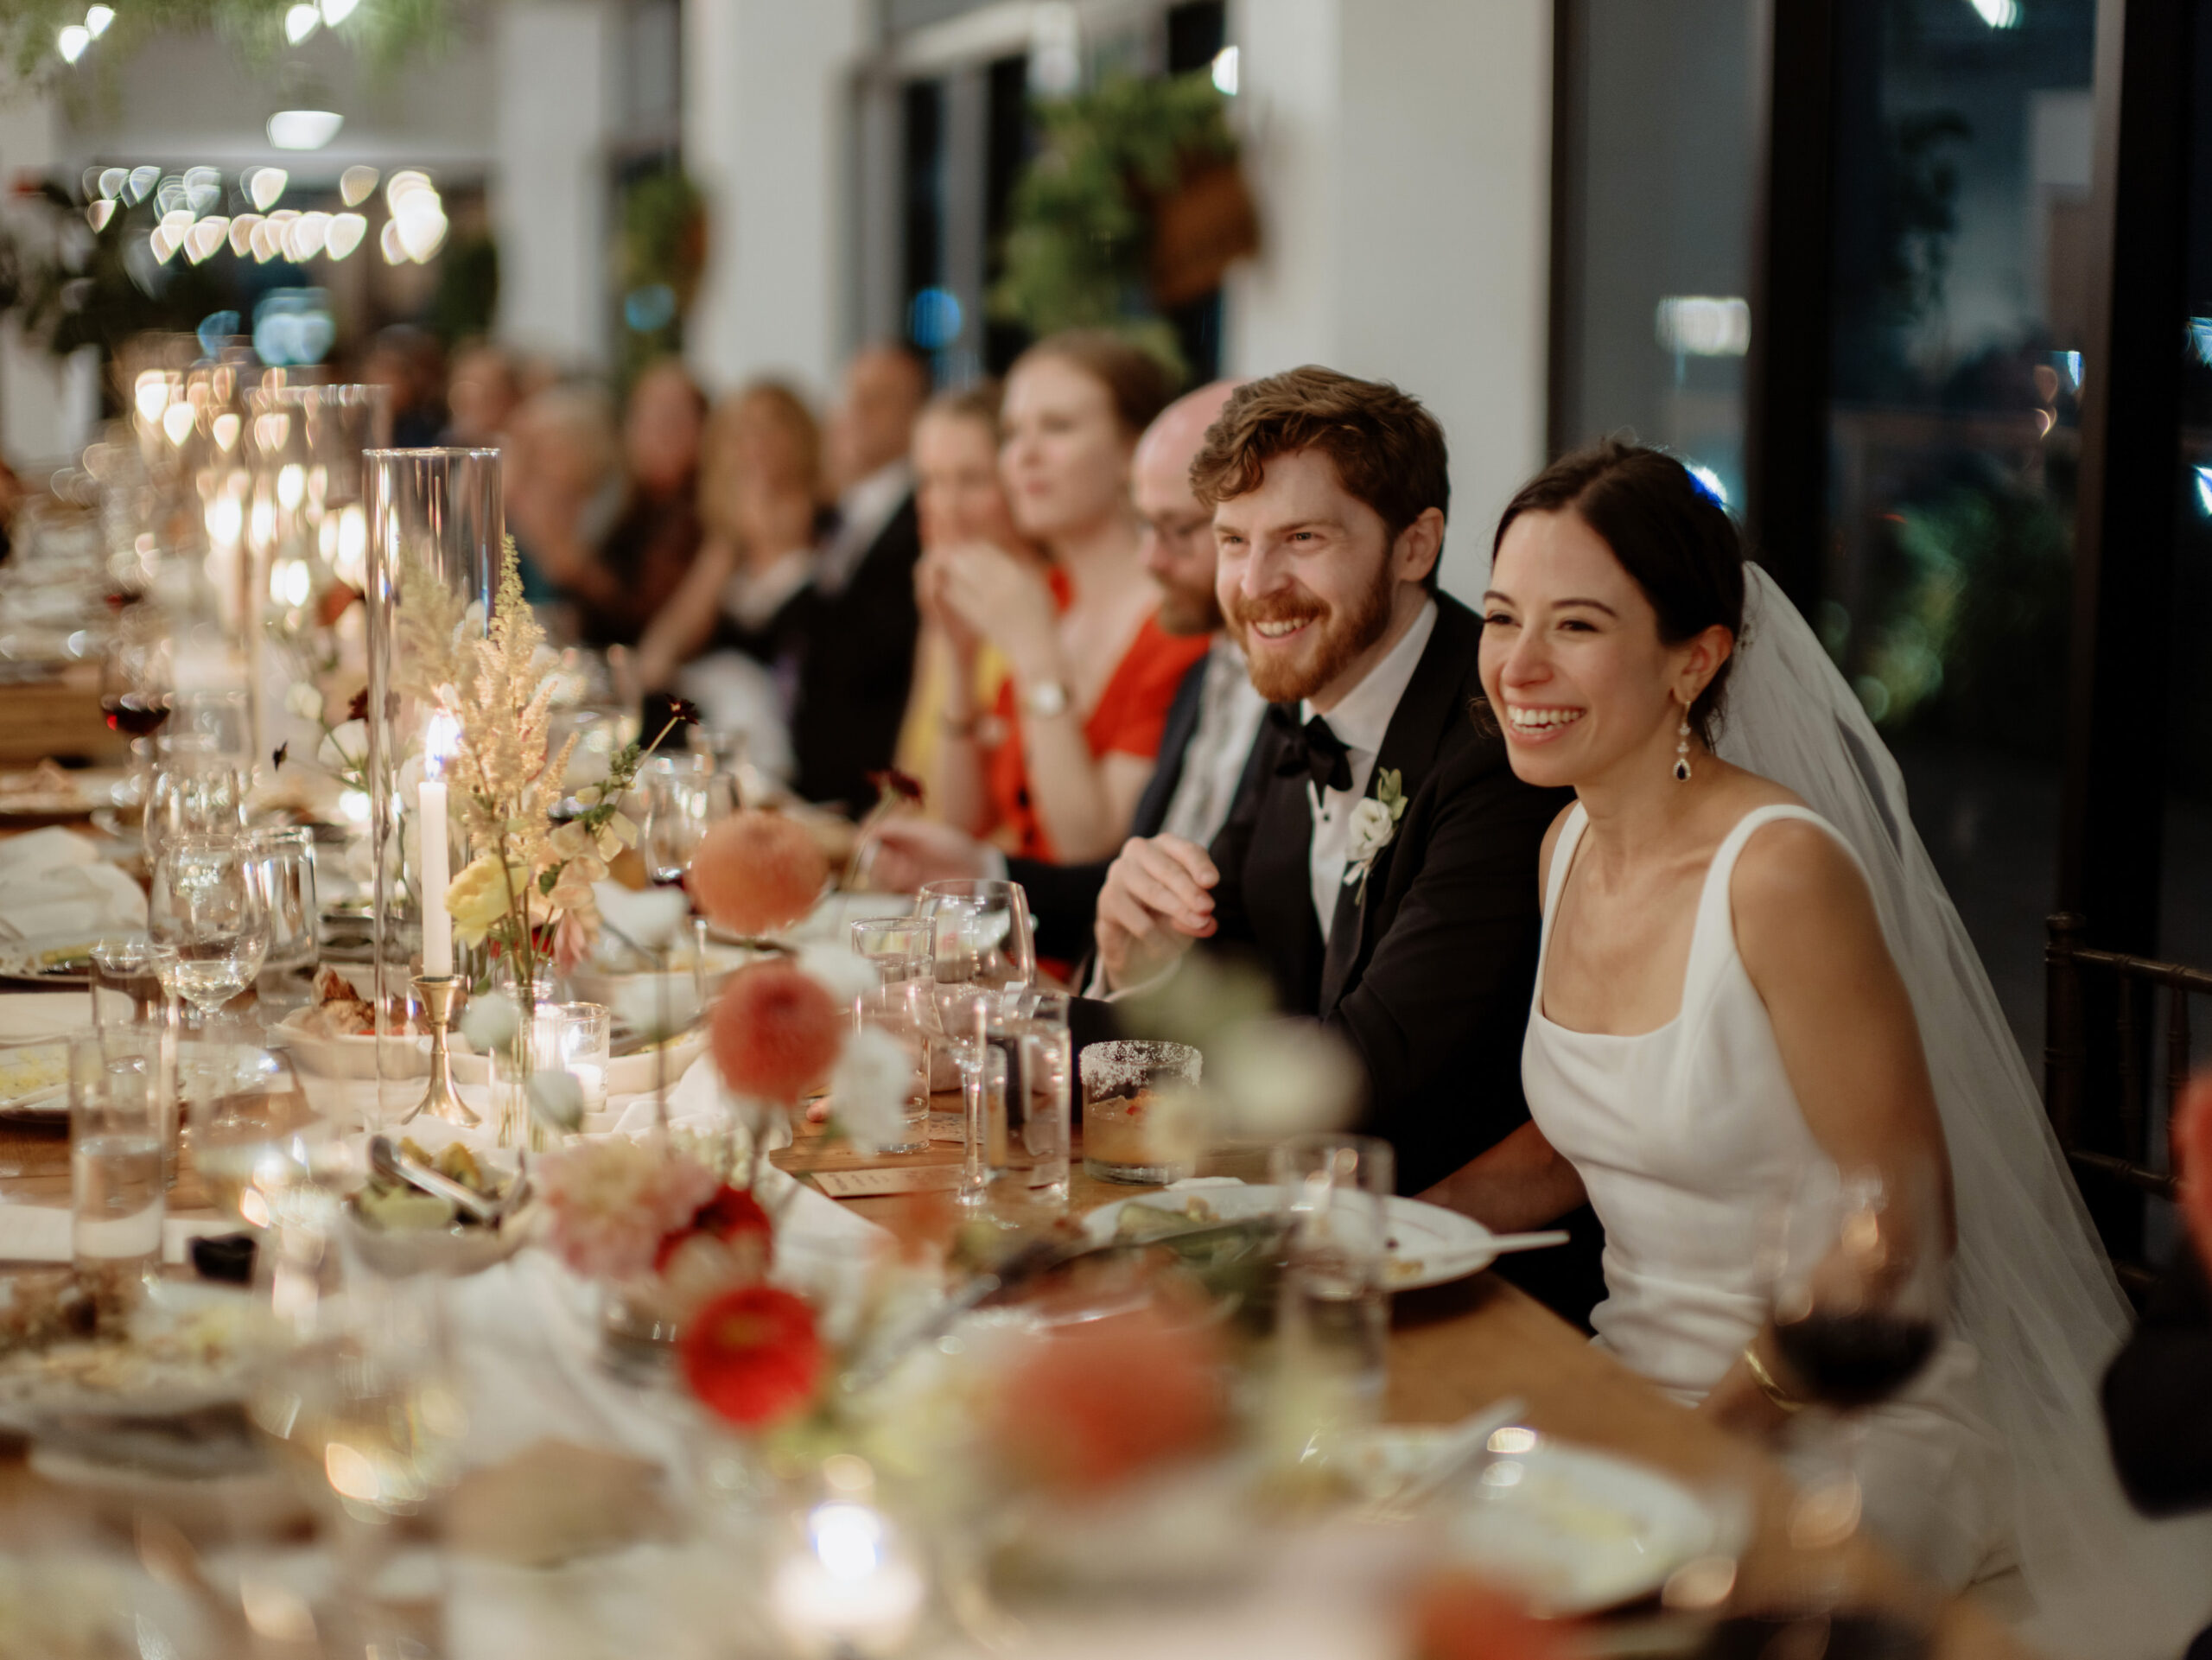 Candid photo of a vibrant wedding reception at The Brooklyn Grange. Image by Jenny Fu Studio